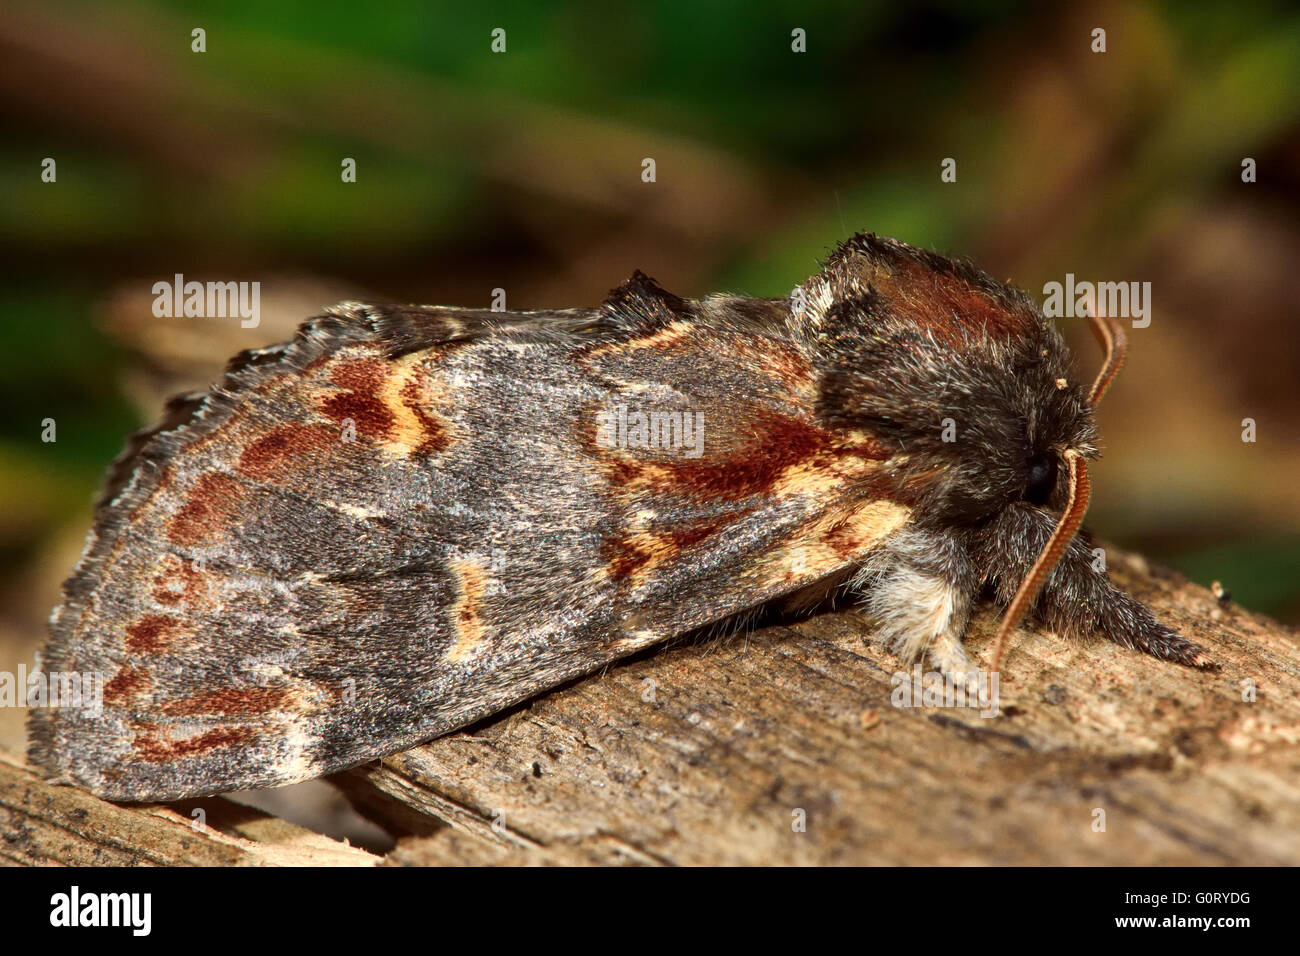 Iron prominent moth (Notodonta dromedarius). British nocturnal insect in the family Notodontidae, at rest Stock Photo